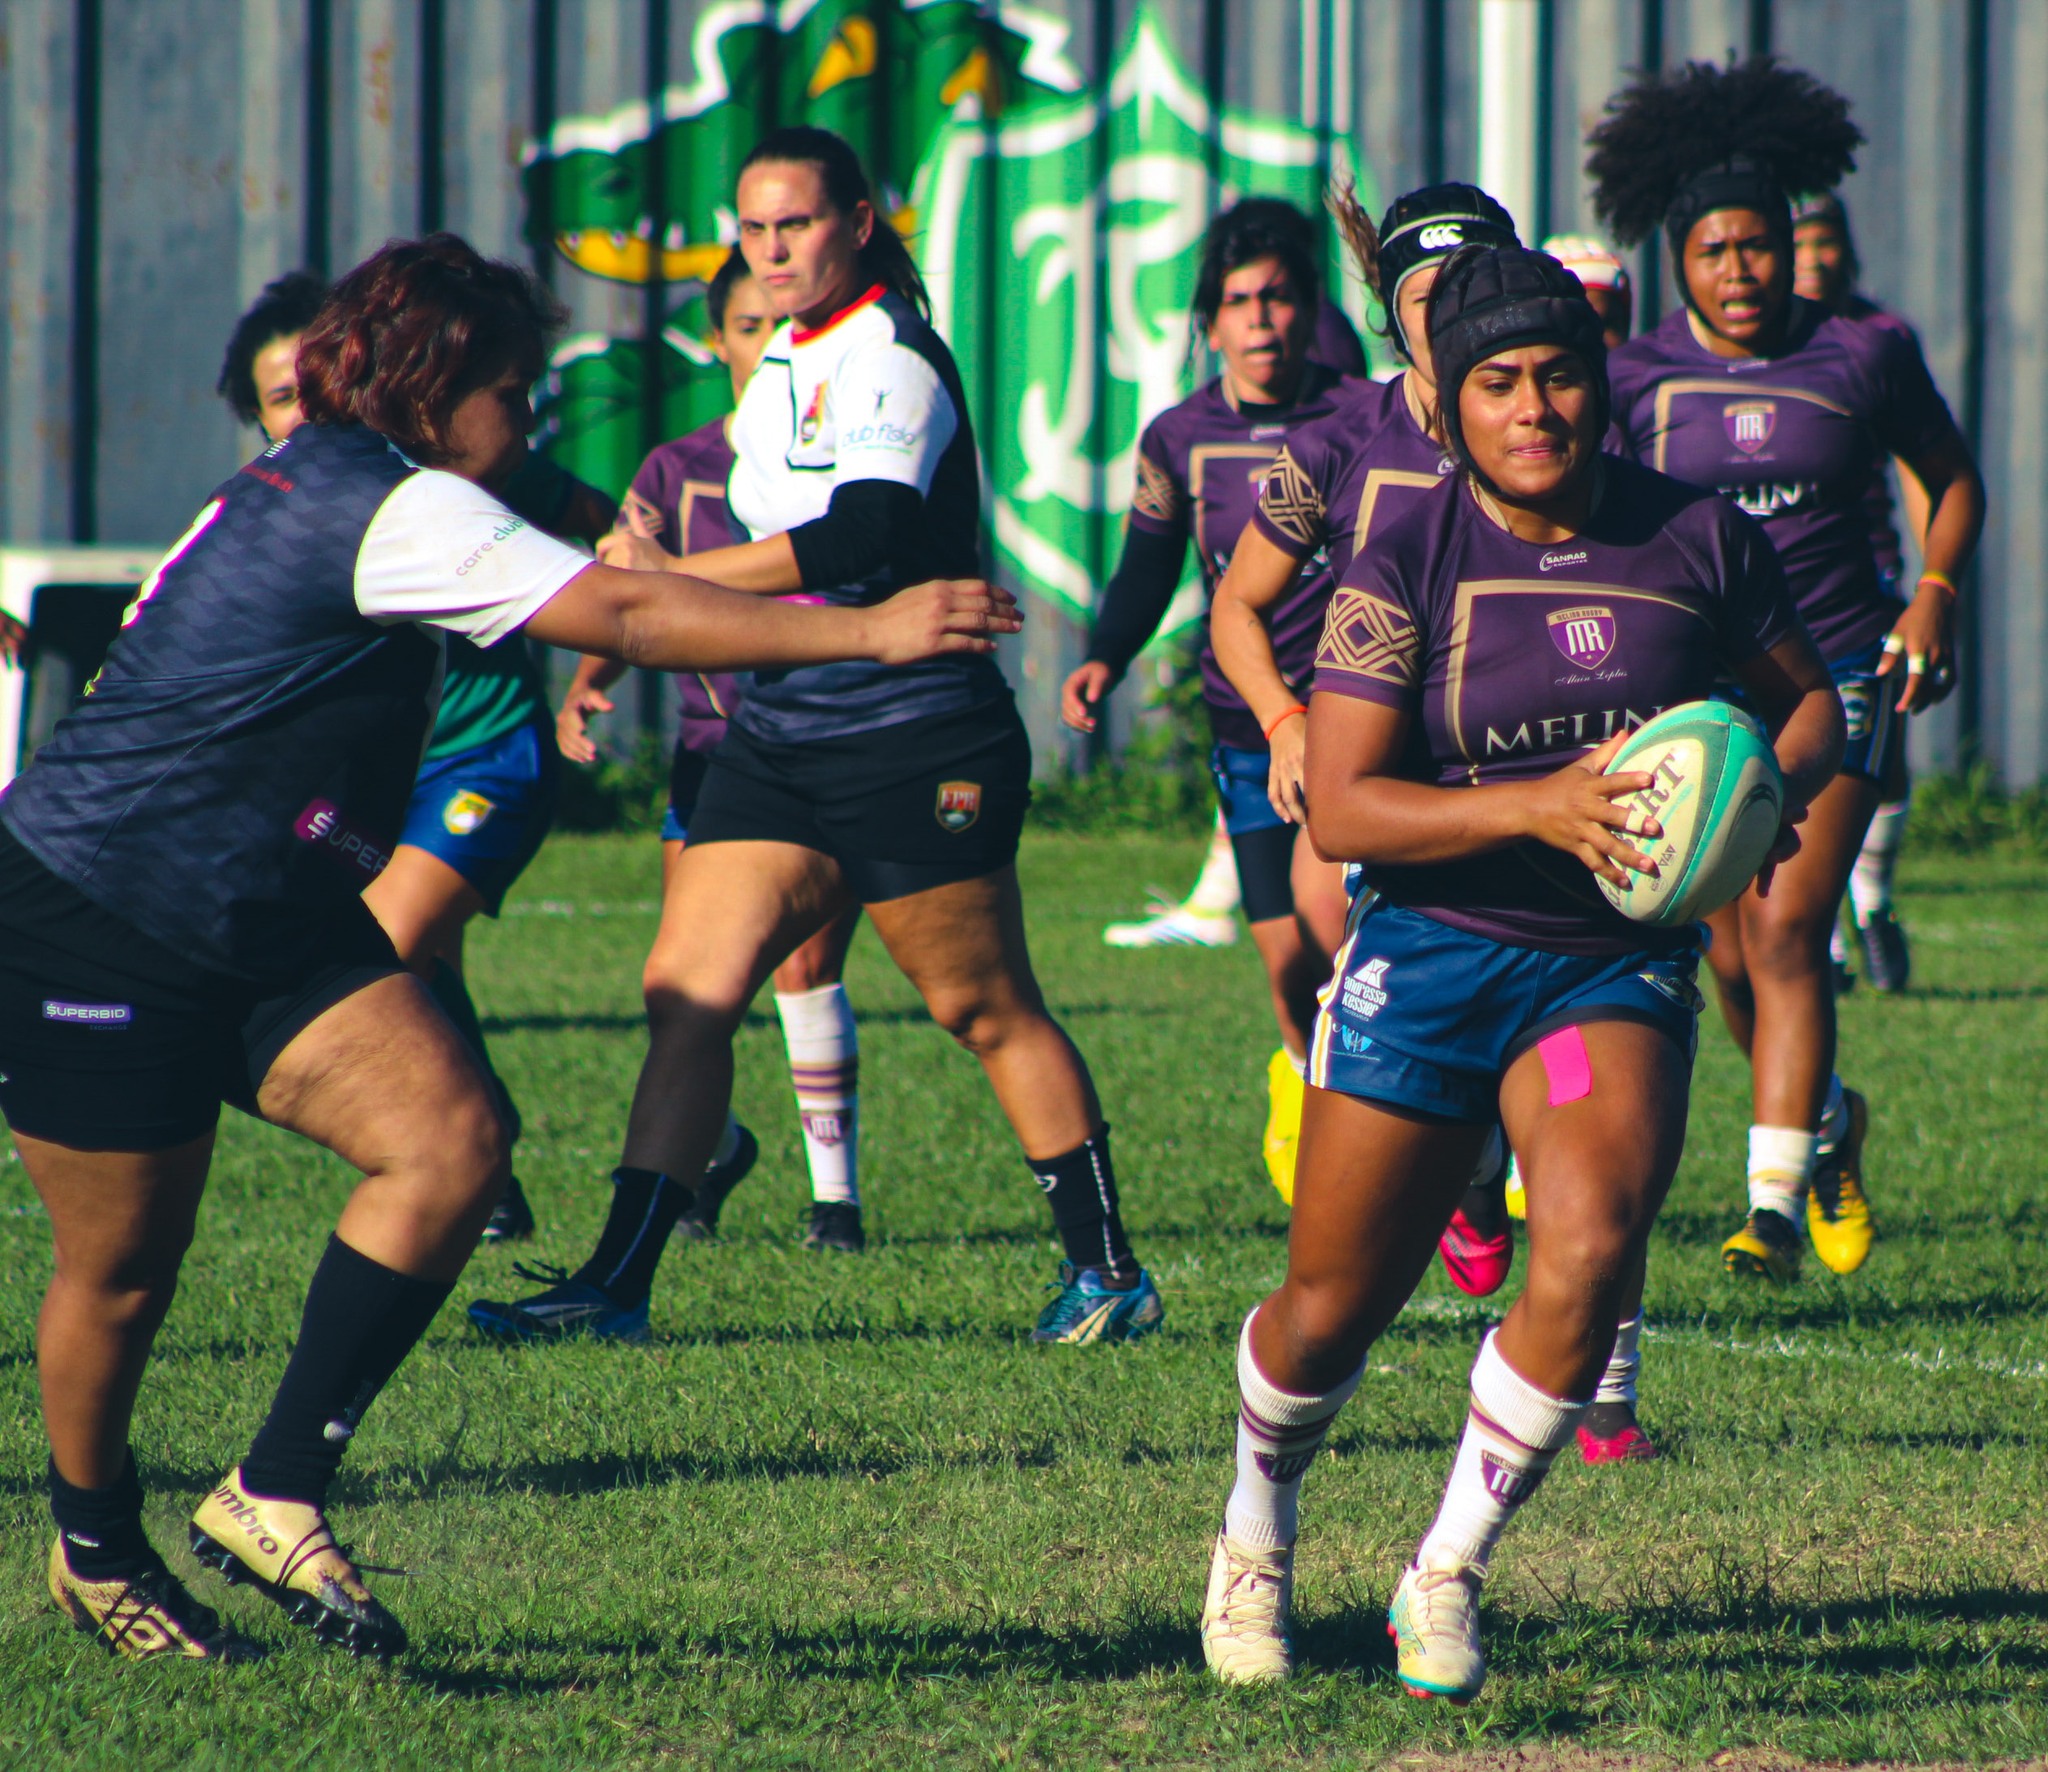 Melina Rugby Clube